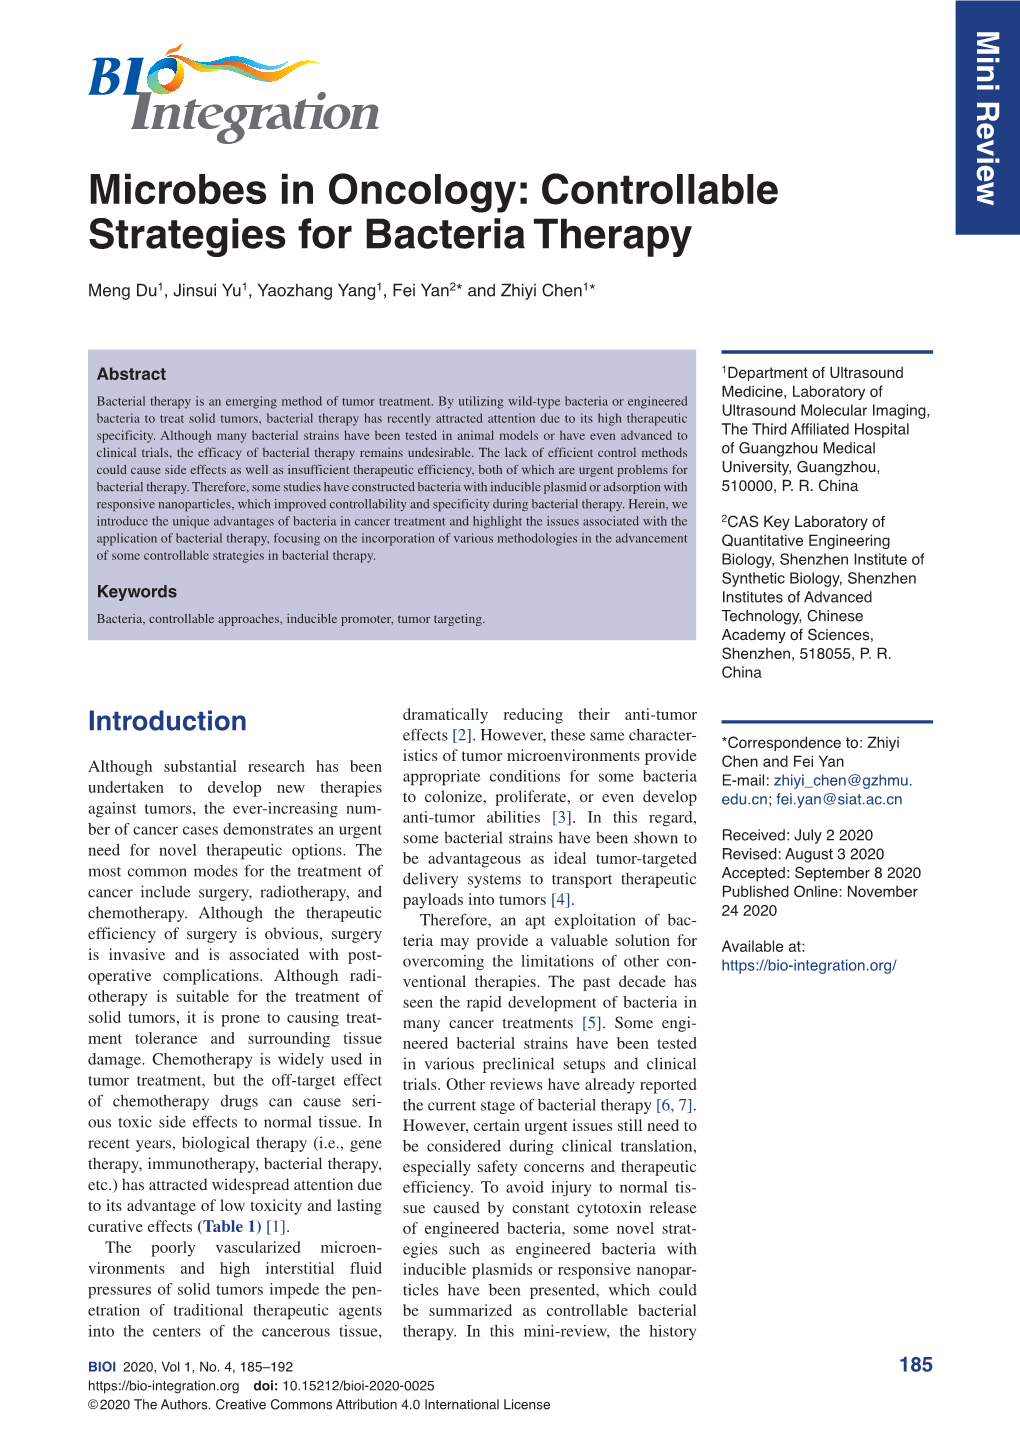 Microbes in Oncology: Controllable Strategies for Bacteria Therapy